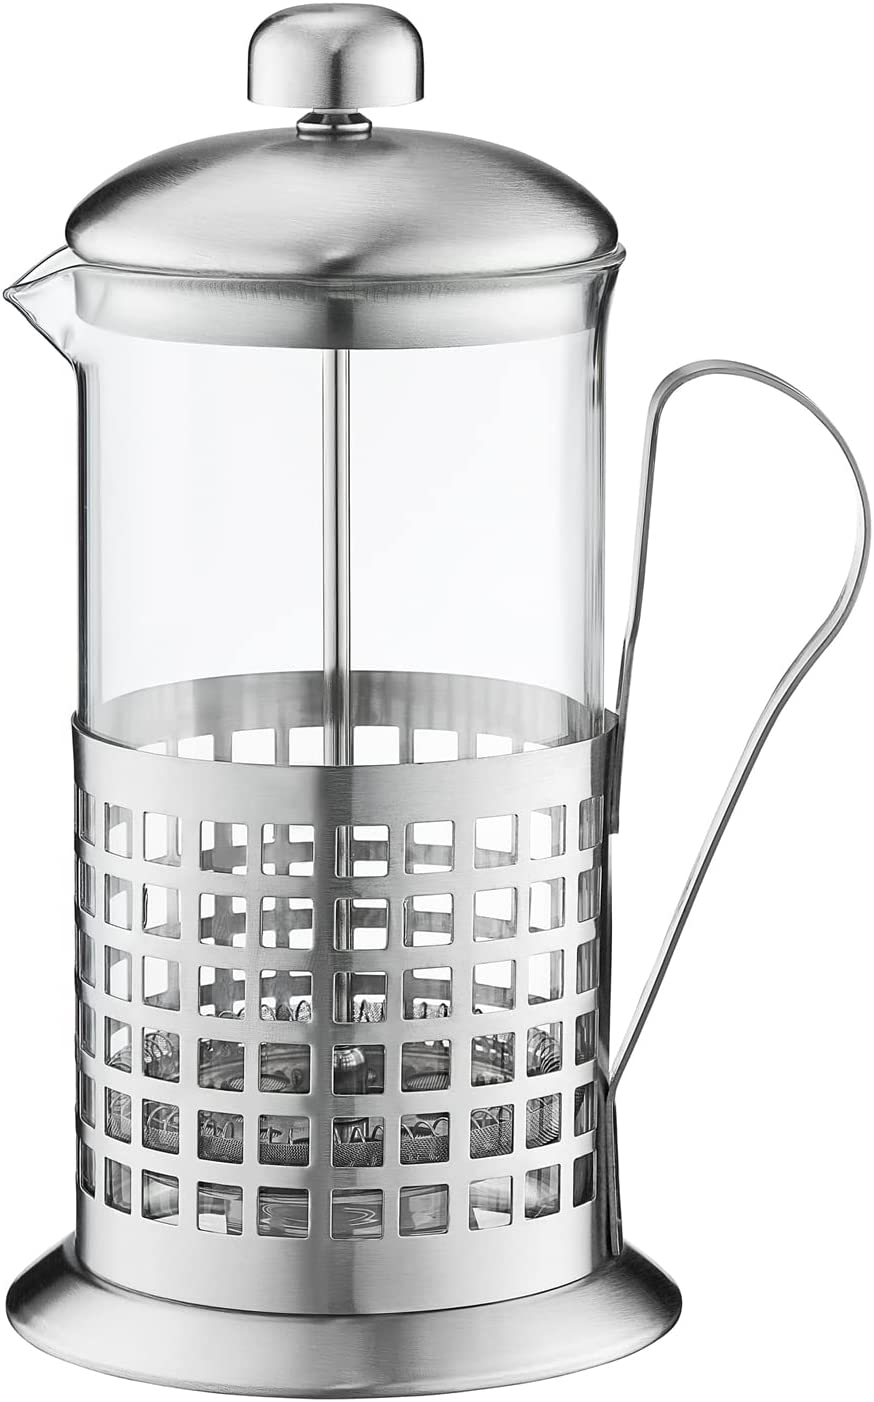 Ambition French Press Press Small 0.35l Glass Coffee Maker Stainless Steel Filter Steel Frame With Handle Grid